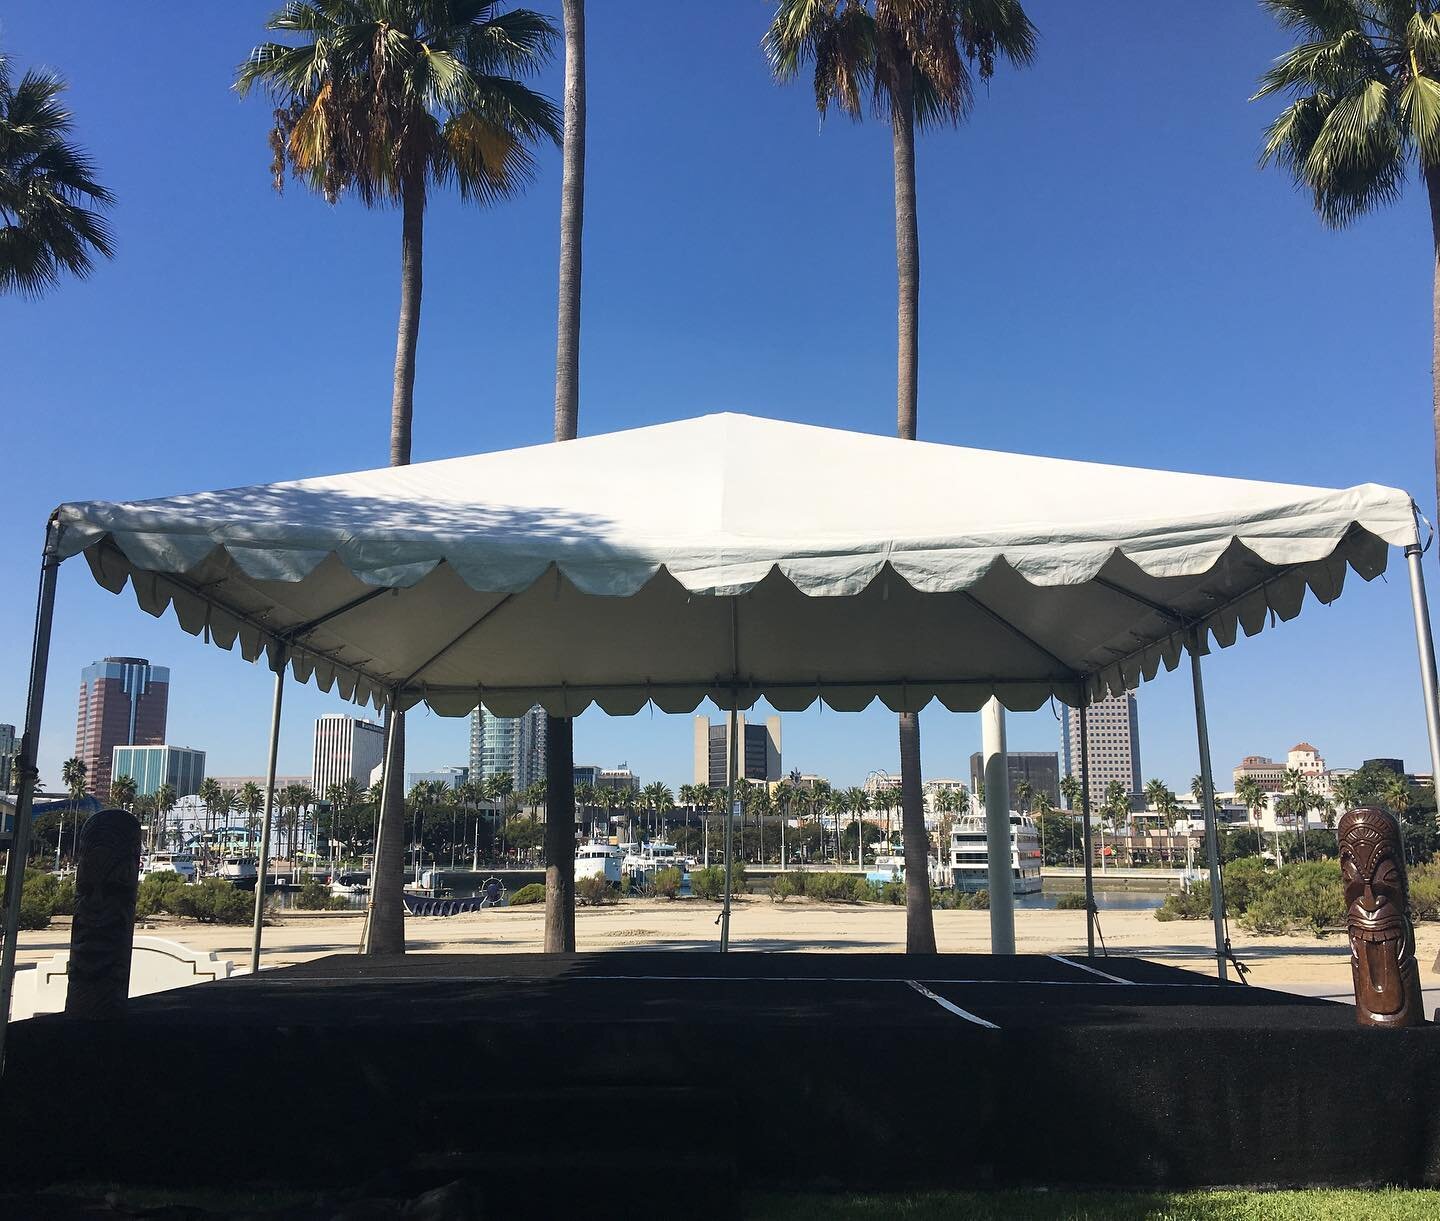 Canopy with Stage #iopartyrentals #partyrentals #rentals #canopy #canopies #stage #event #tent #losangeles